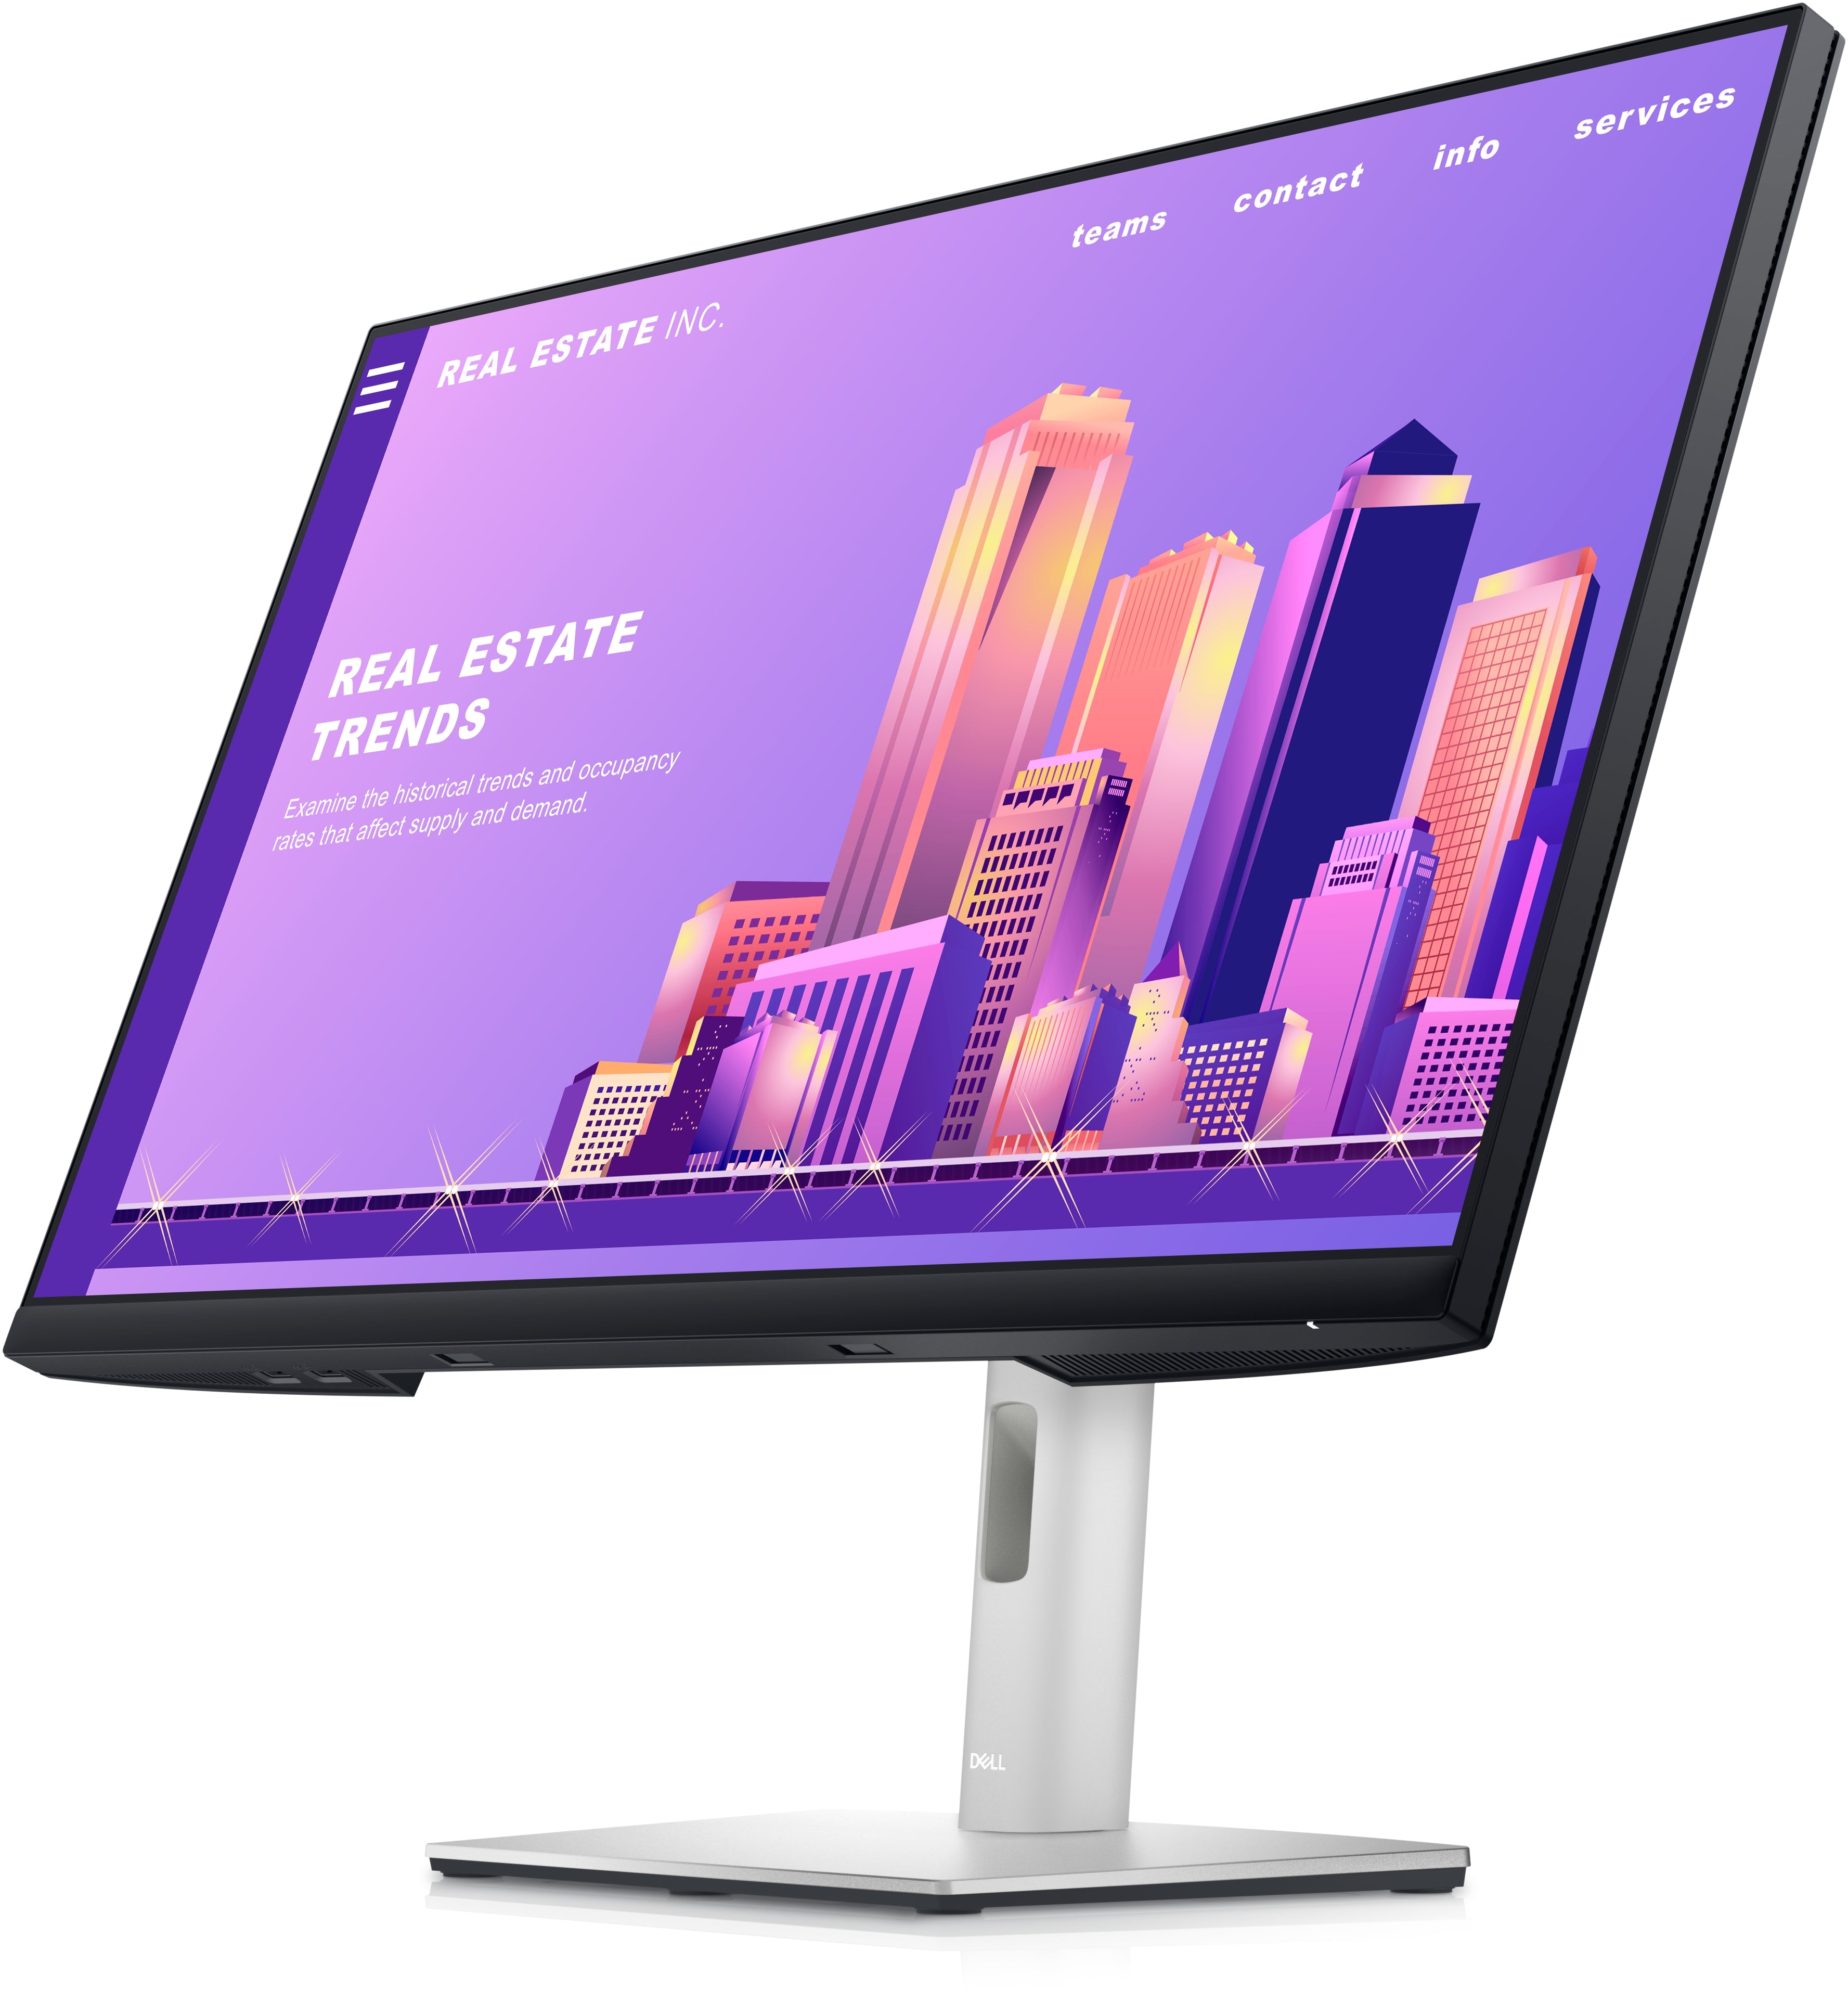 DELL 27 HEIGHT ADJUSTABLE MONITOR